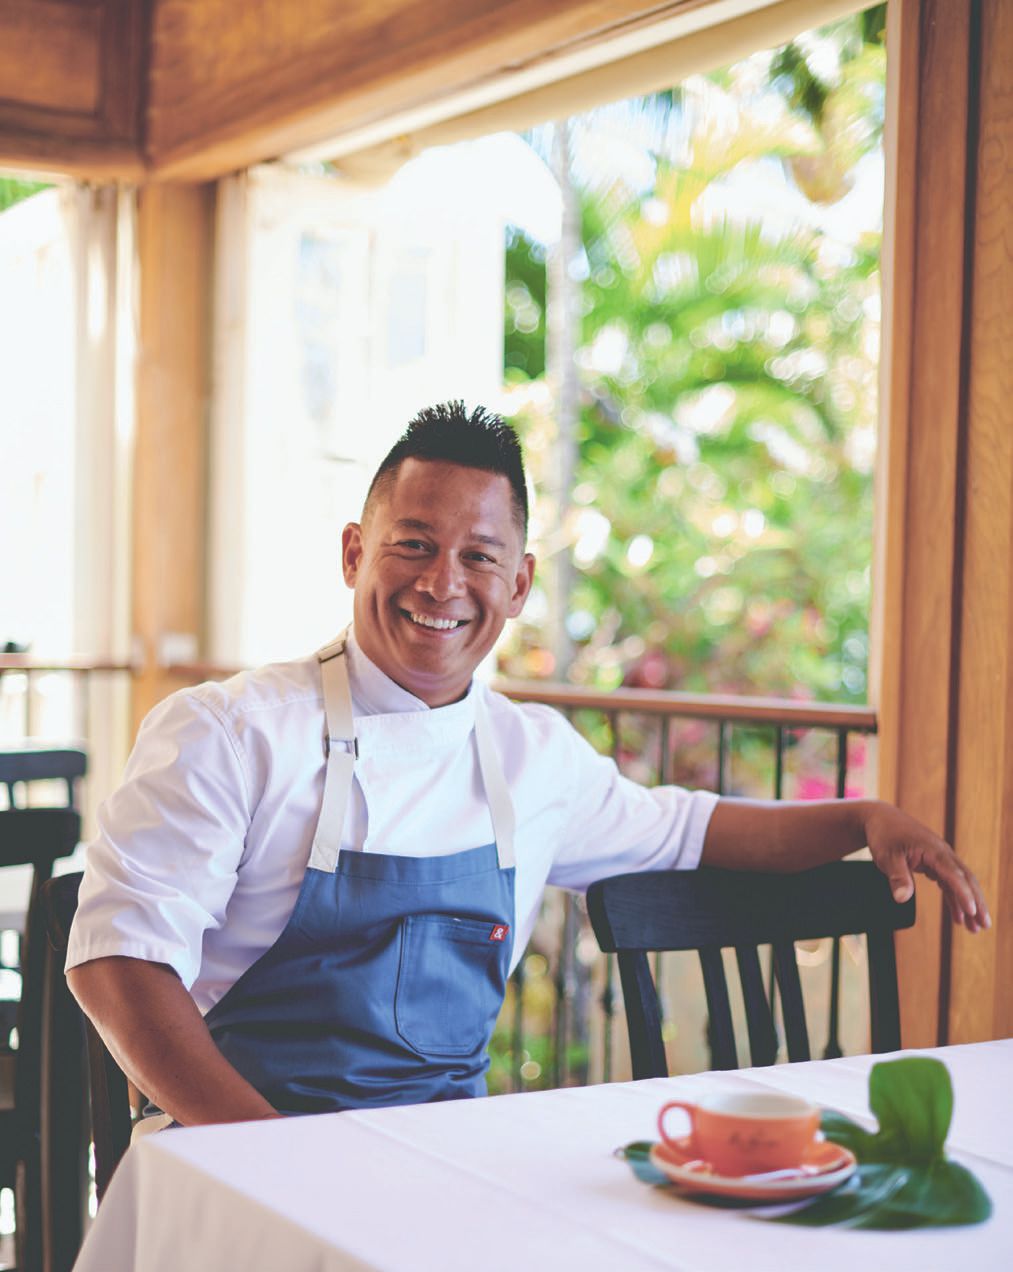 Pacific’o on the Beach chef Isaac Bancaco PHOTO BY SPENCER STARNES/PACIFIC’O ON THE BEACH